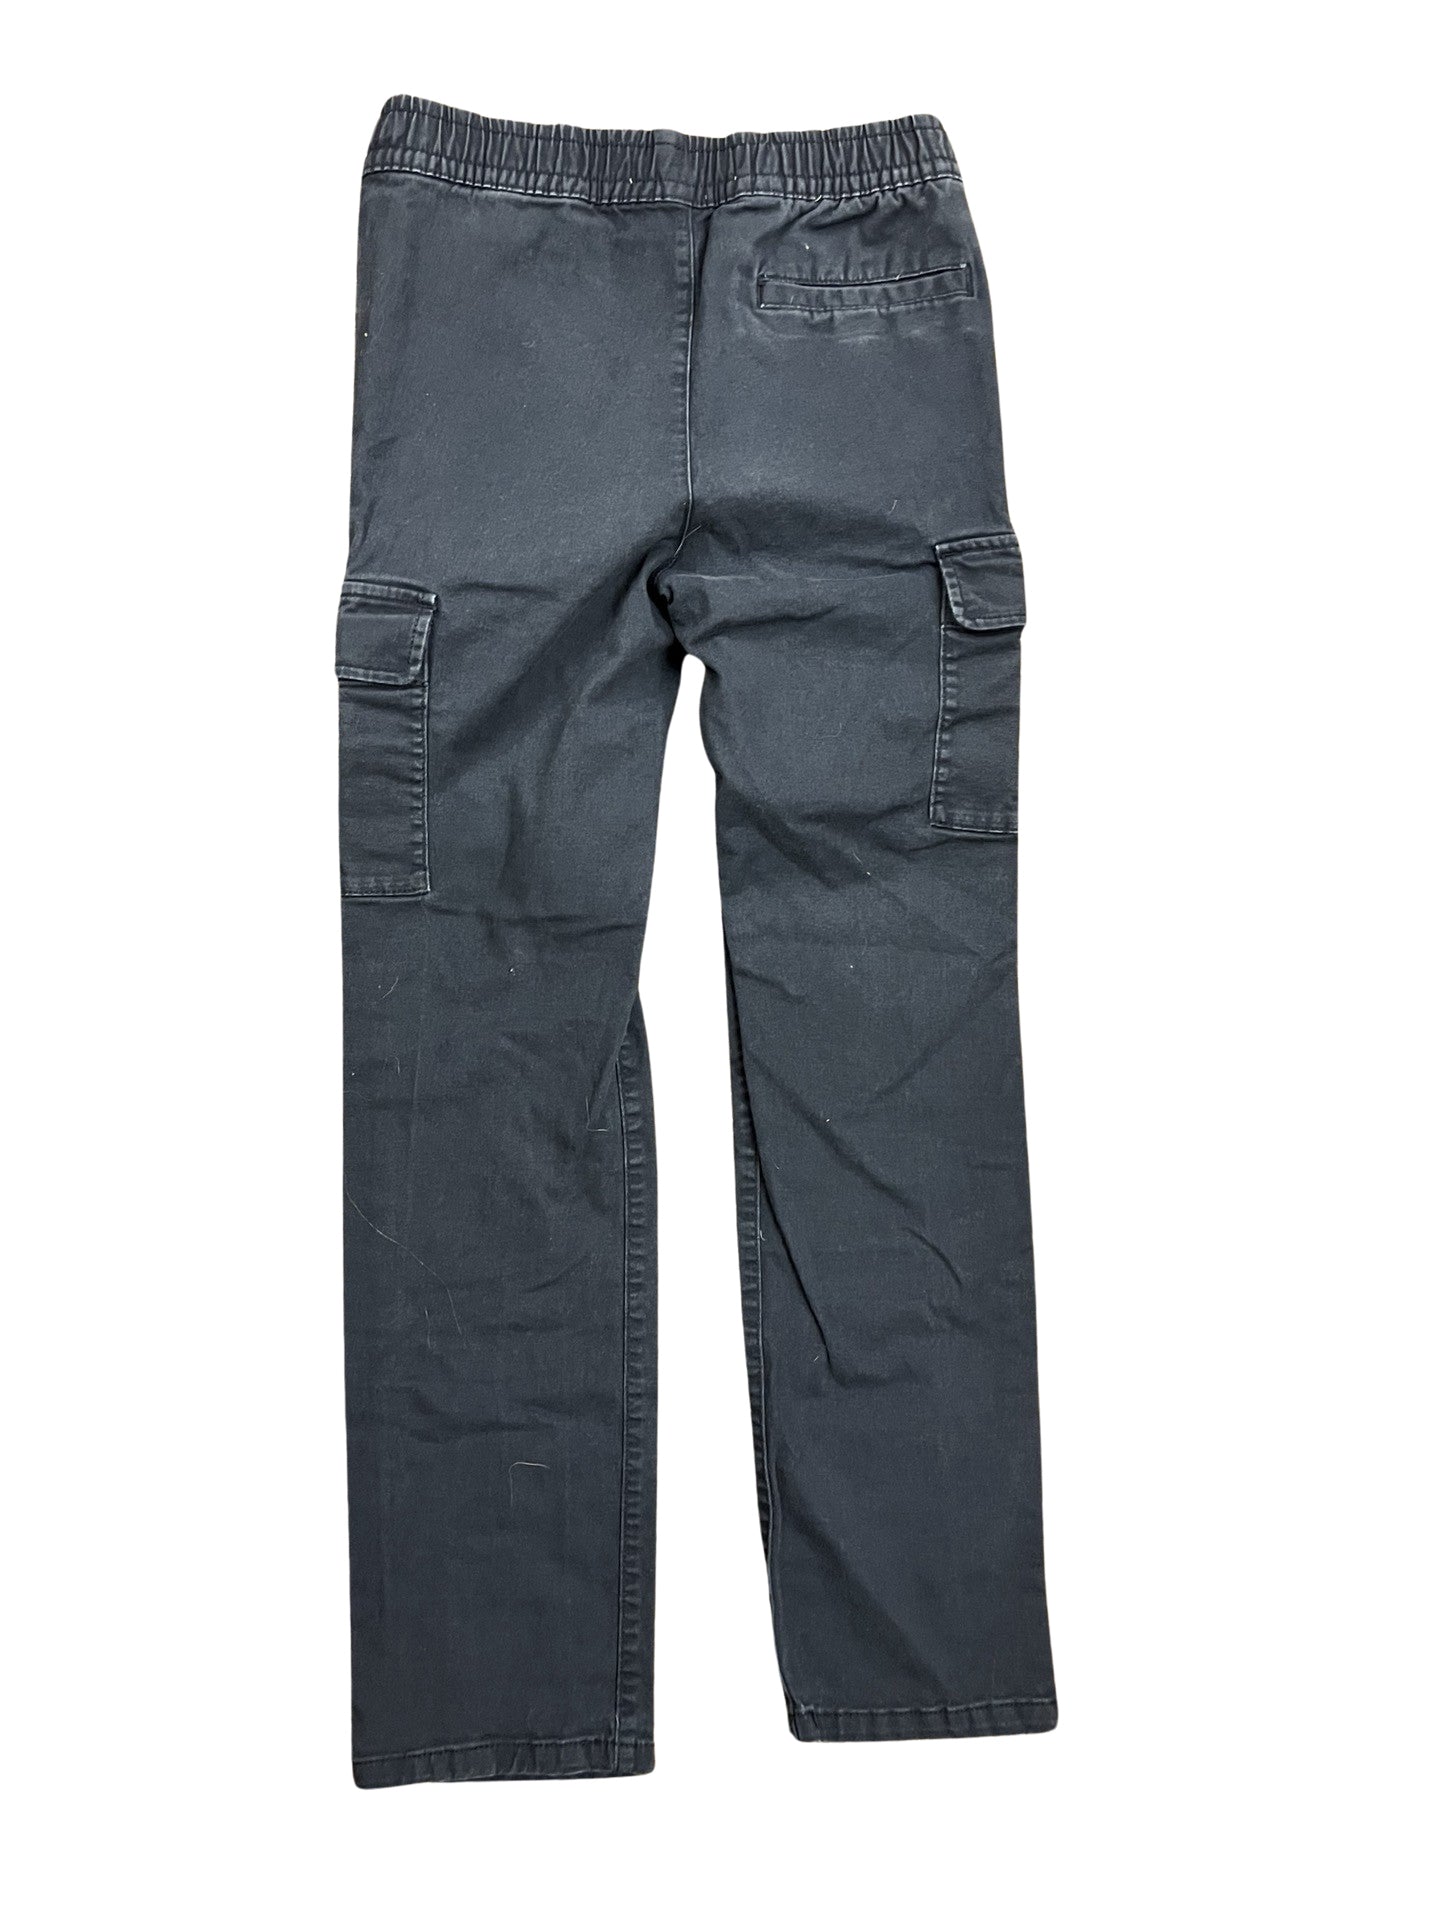 Old Navy 10/12 Pants